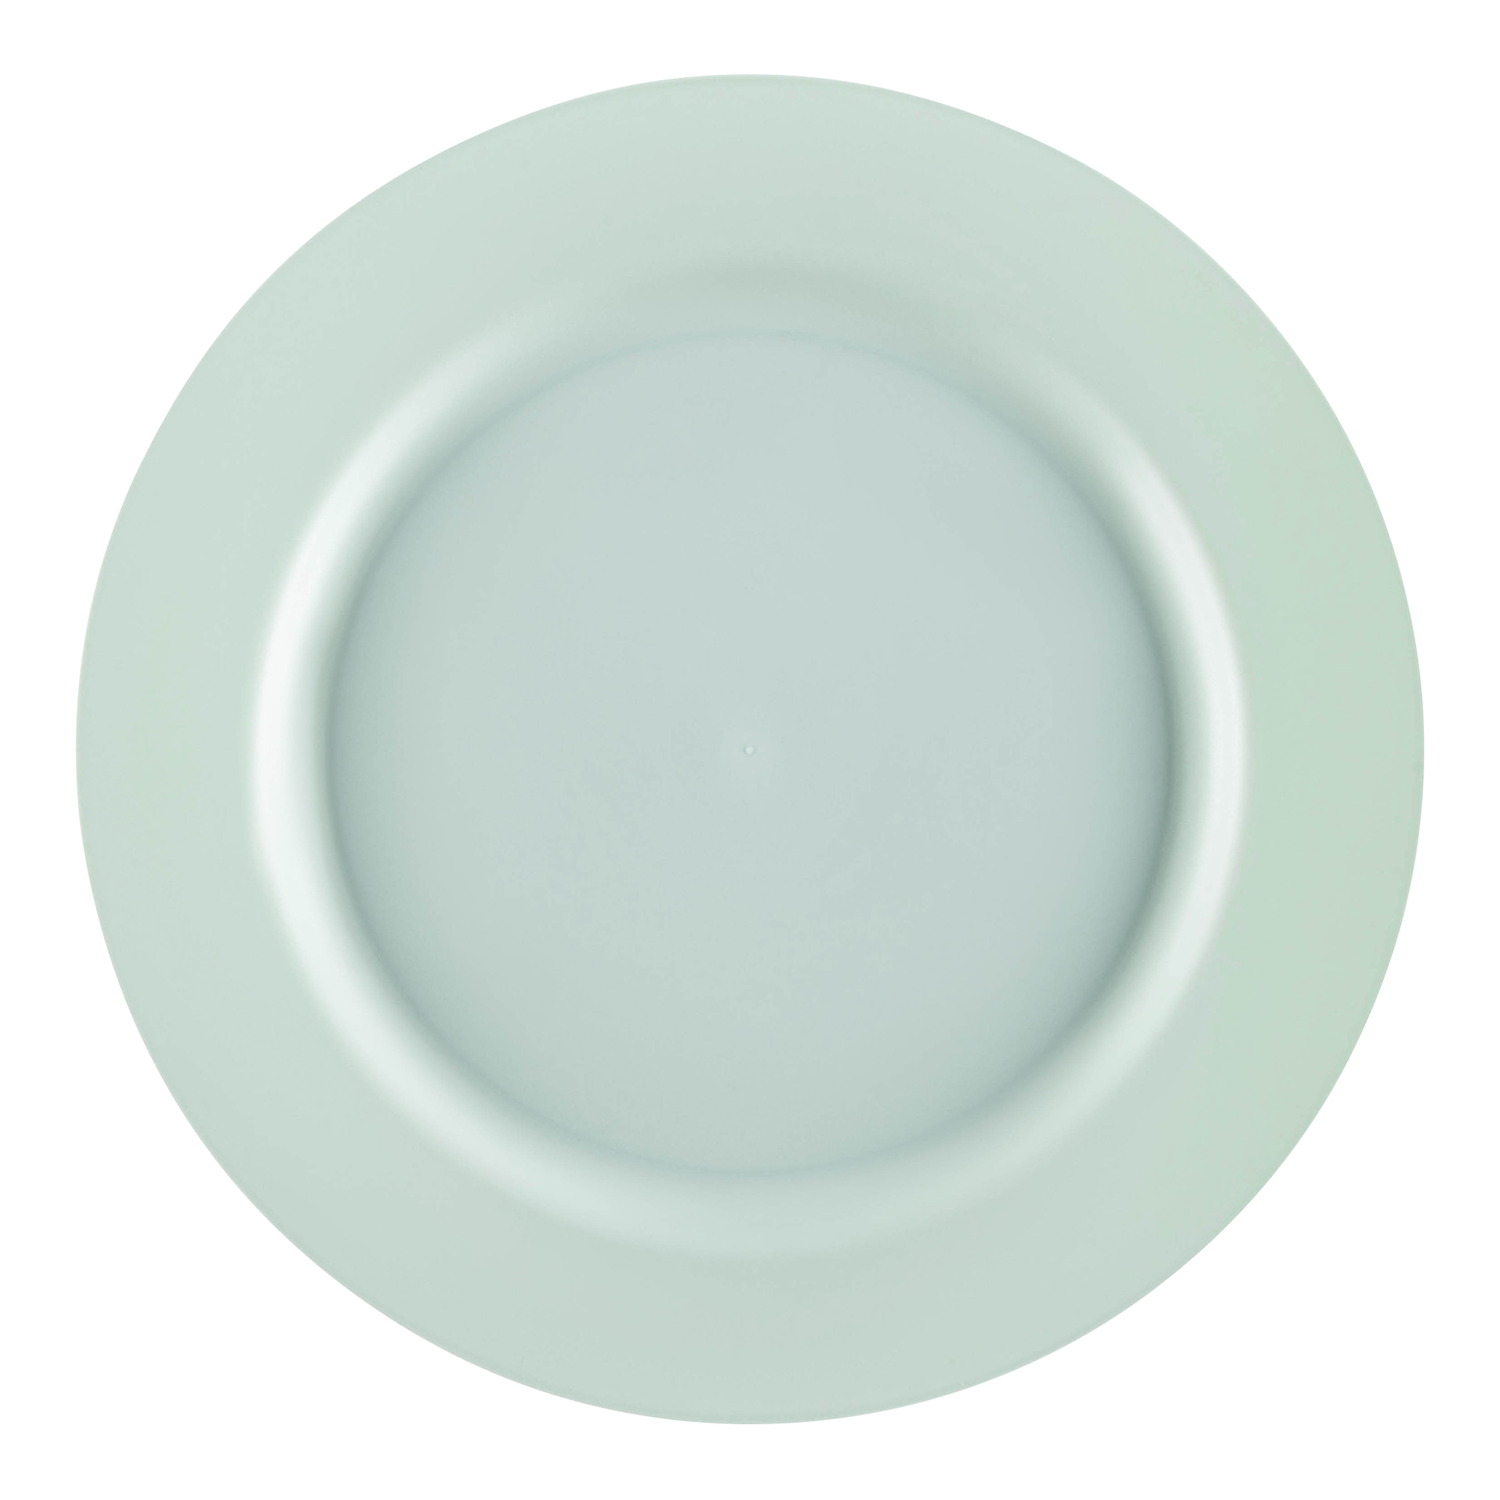 Matte Turquoise Round Disposable Plastic Appetizer/Salad Plates (7.5") | The Kaya Collection